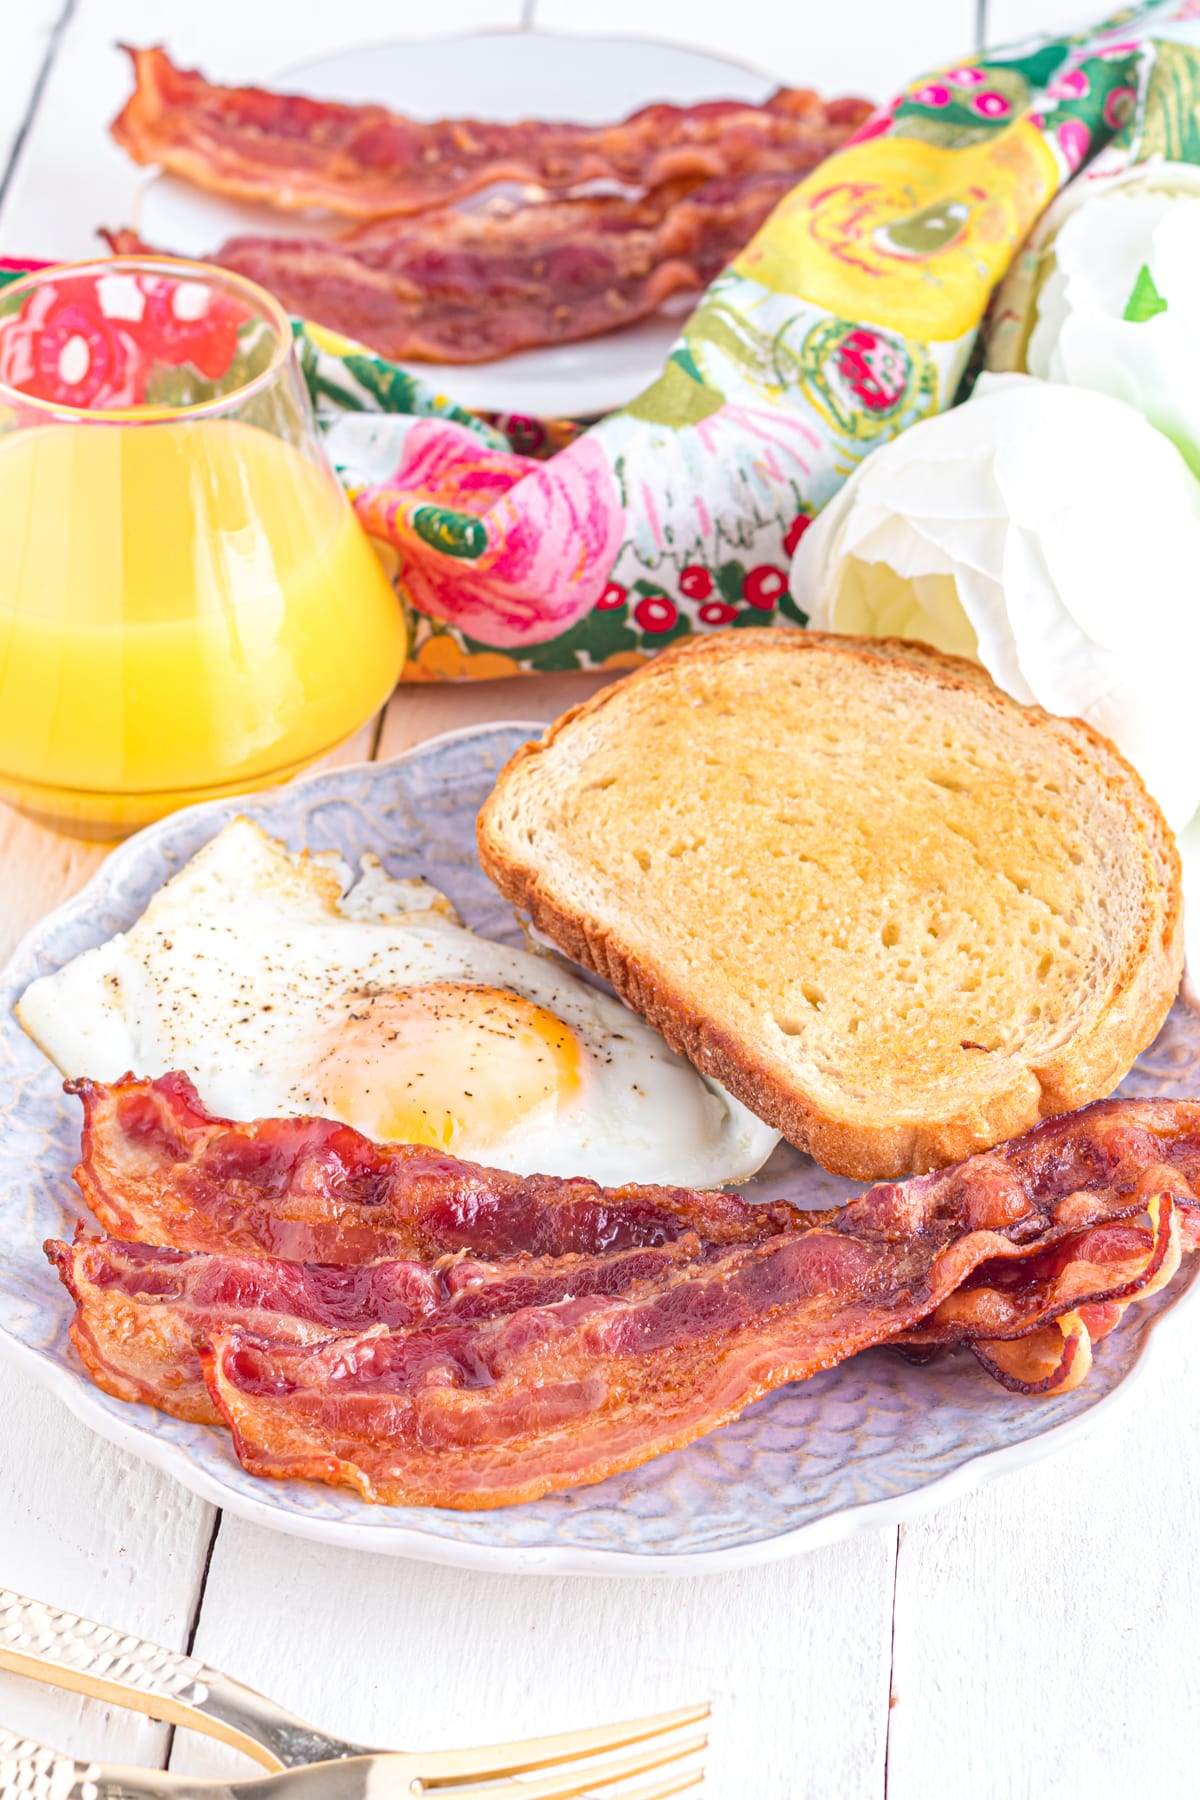 Bacon on a plate with egg and toast.